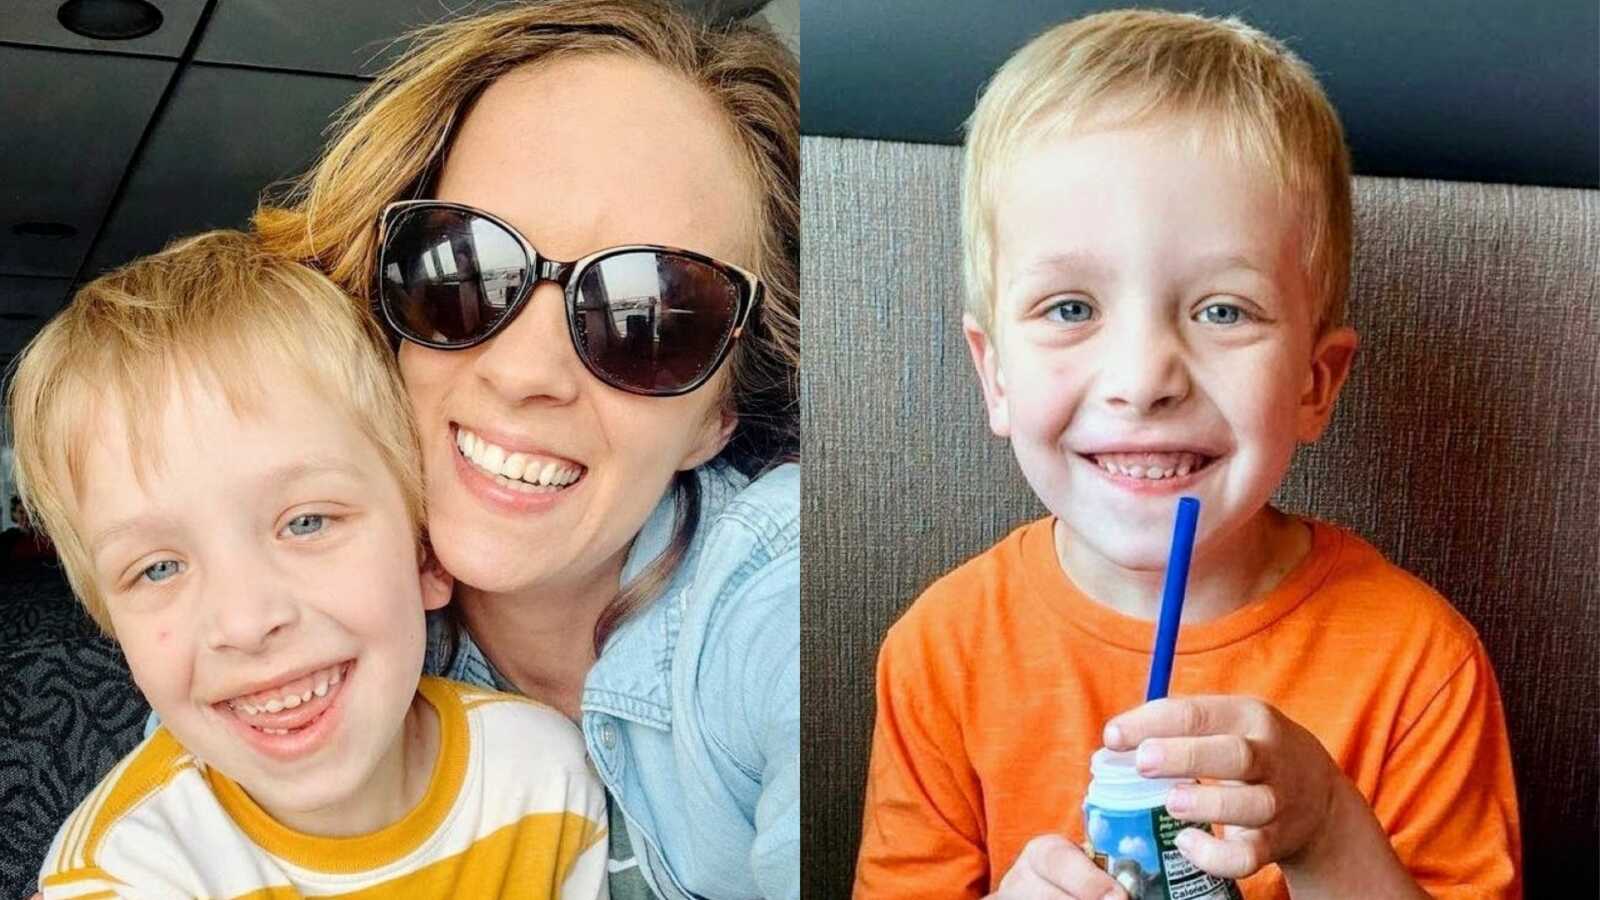 On the left, special needs mom takes a selfie with her son with autism, on the right, mom takes a photo of her son smiling at a restaurant